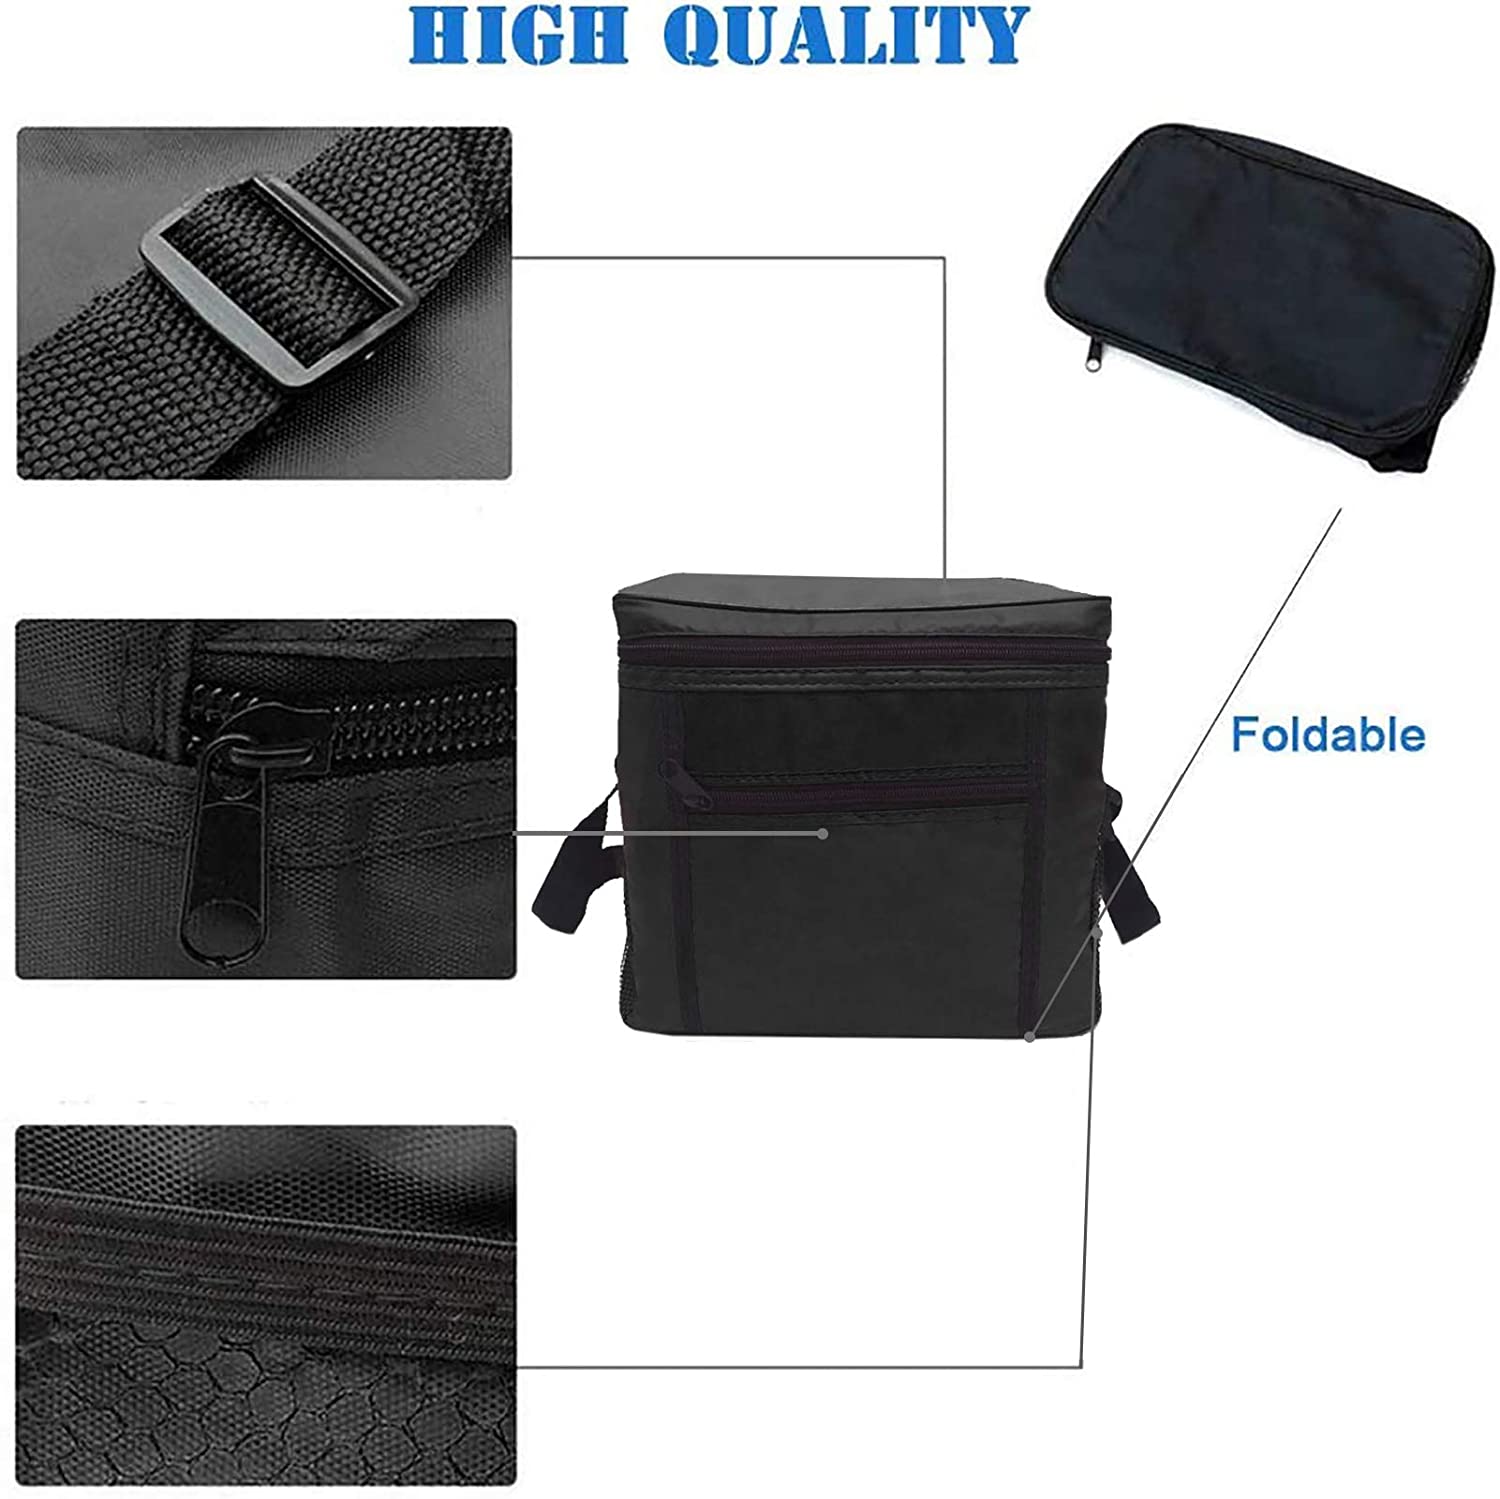 acdanc Foldable cooler bag, picnic bag, cooler bag, lunch bag, ice bag, ice bag, mini foldable cooler bag, mini cooler bags, small foldable thermal bag, insulated lunch bag, cooler for picnic - image 2 of 6